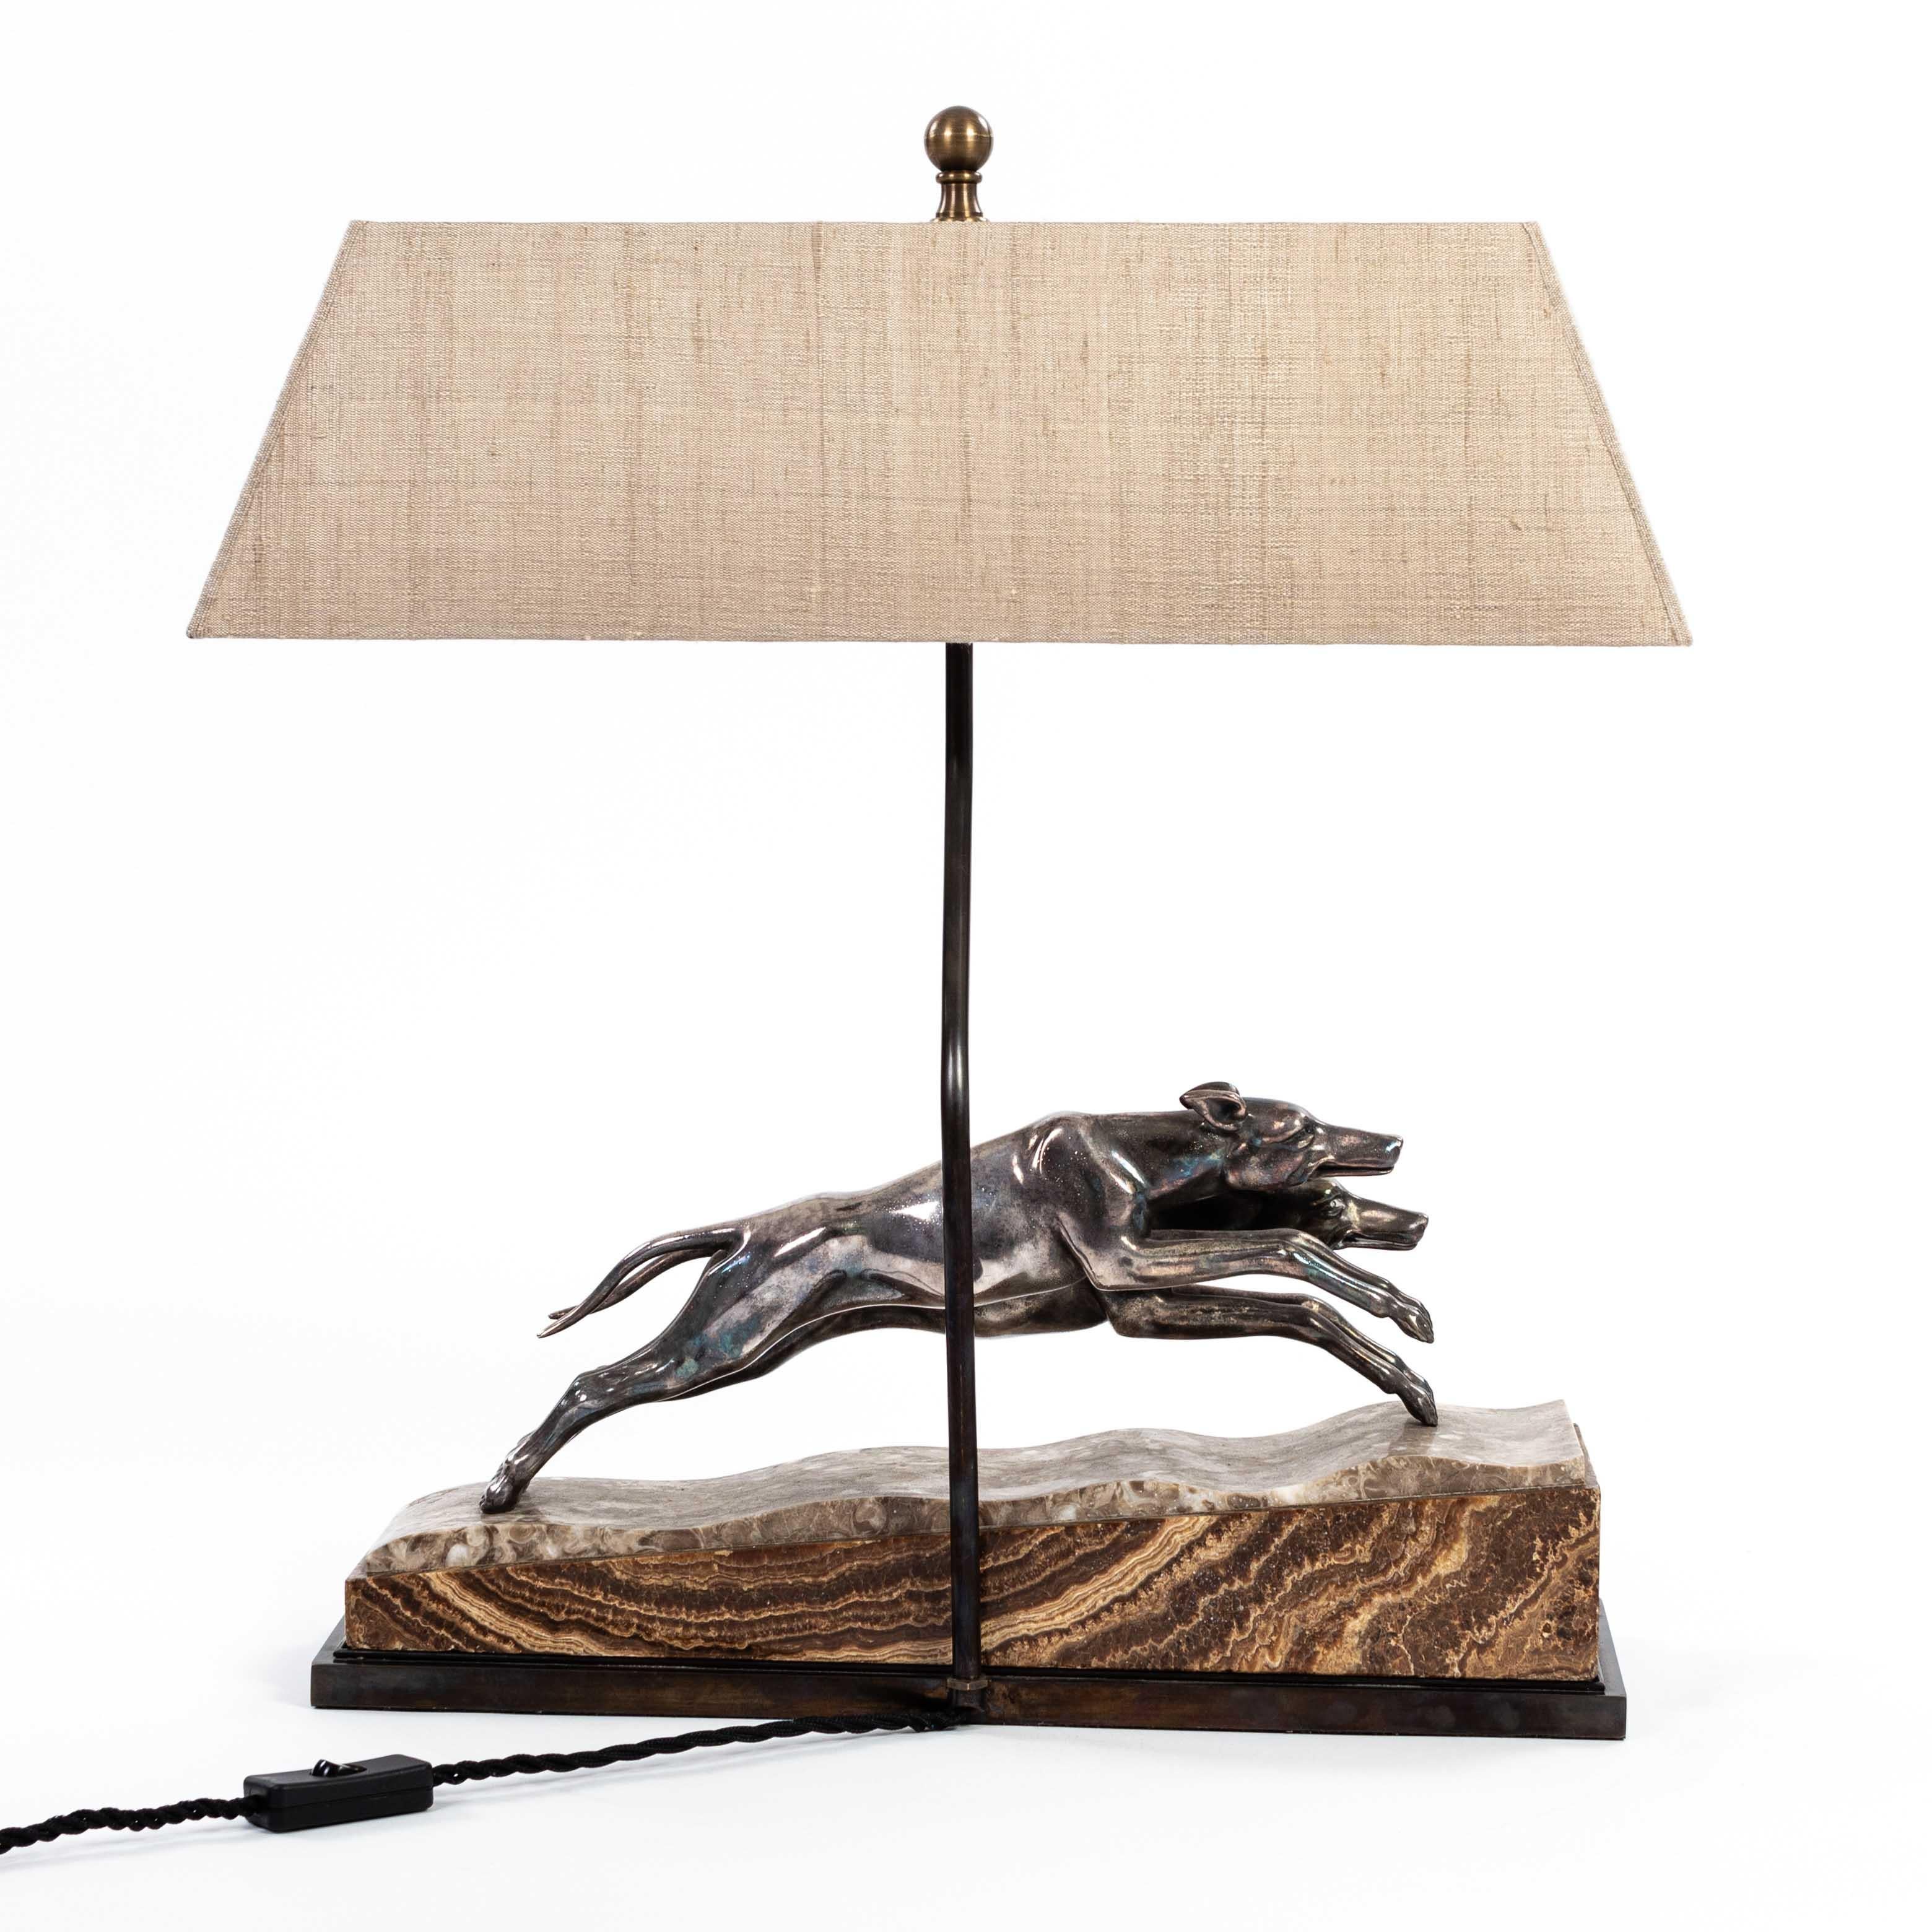 william the whippet lamp